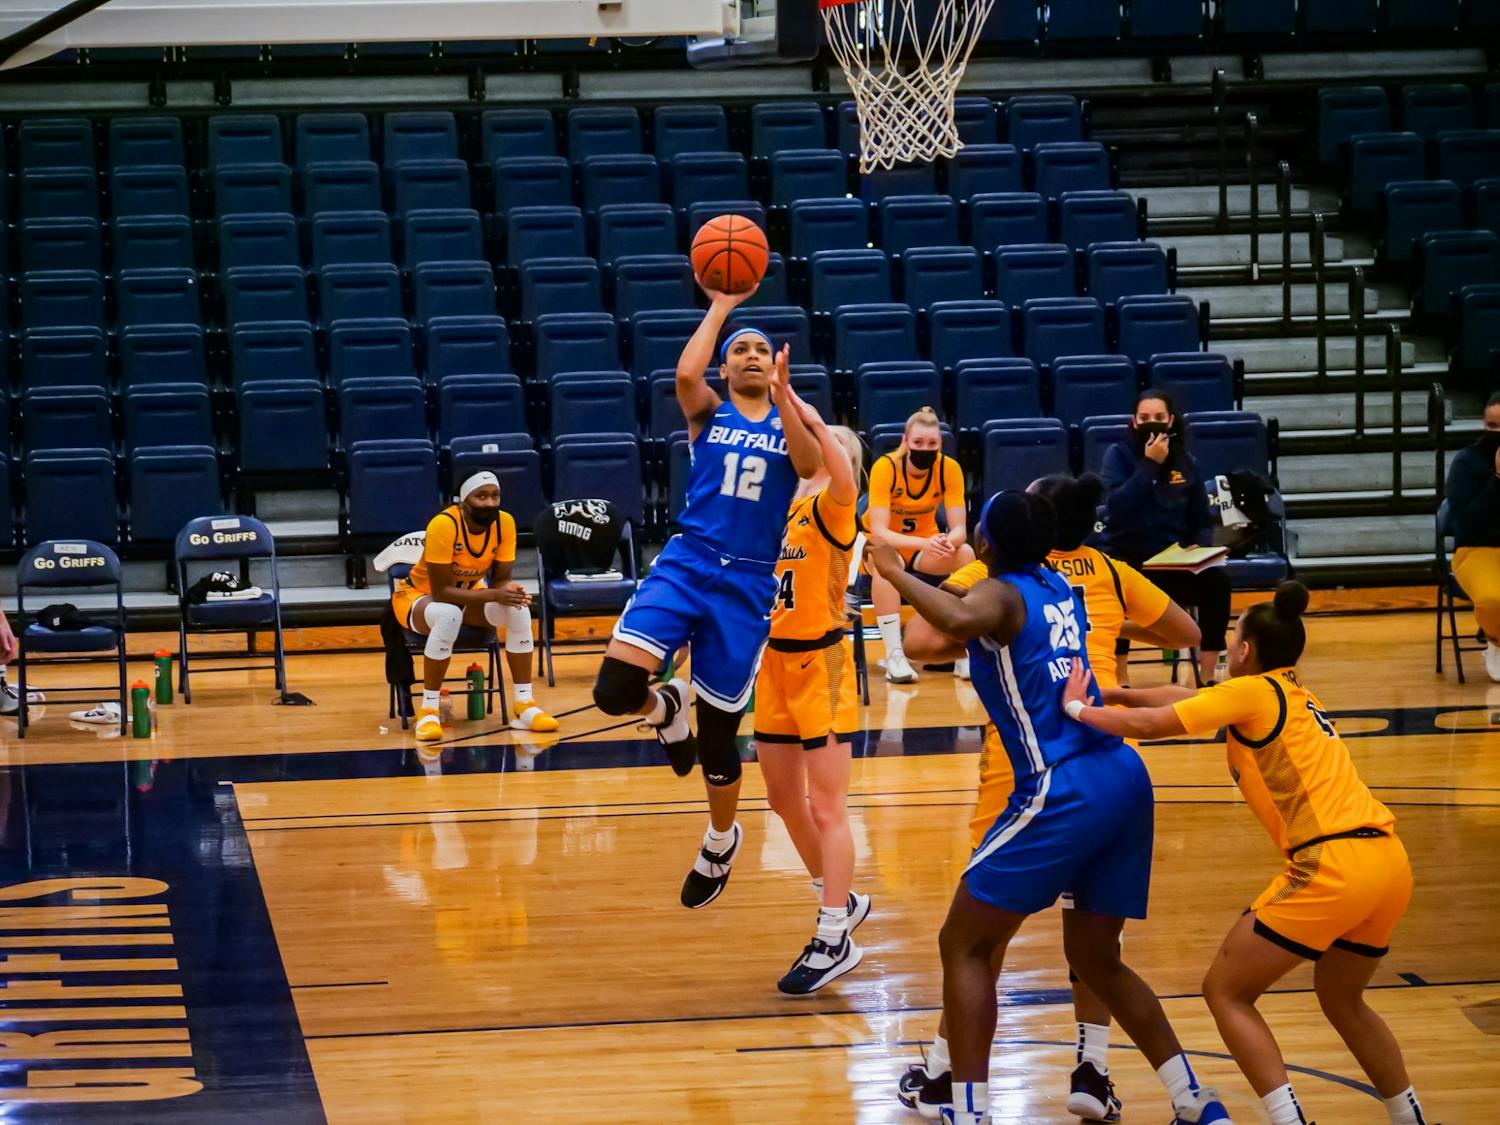 Freshman guard Cheyenne McEvans has averaged 11.0 points, 5.6 rebounds and 2.2 assists per game while shooting nearly 43% from the field this season.